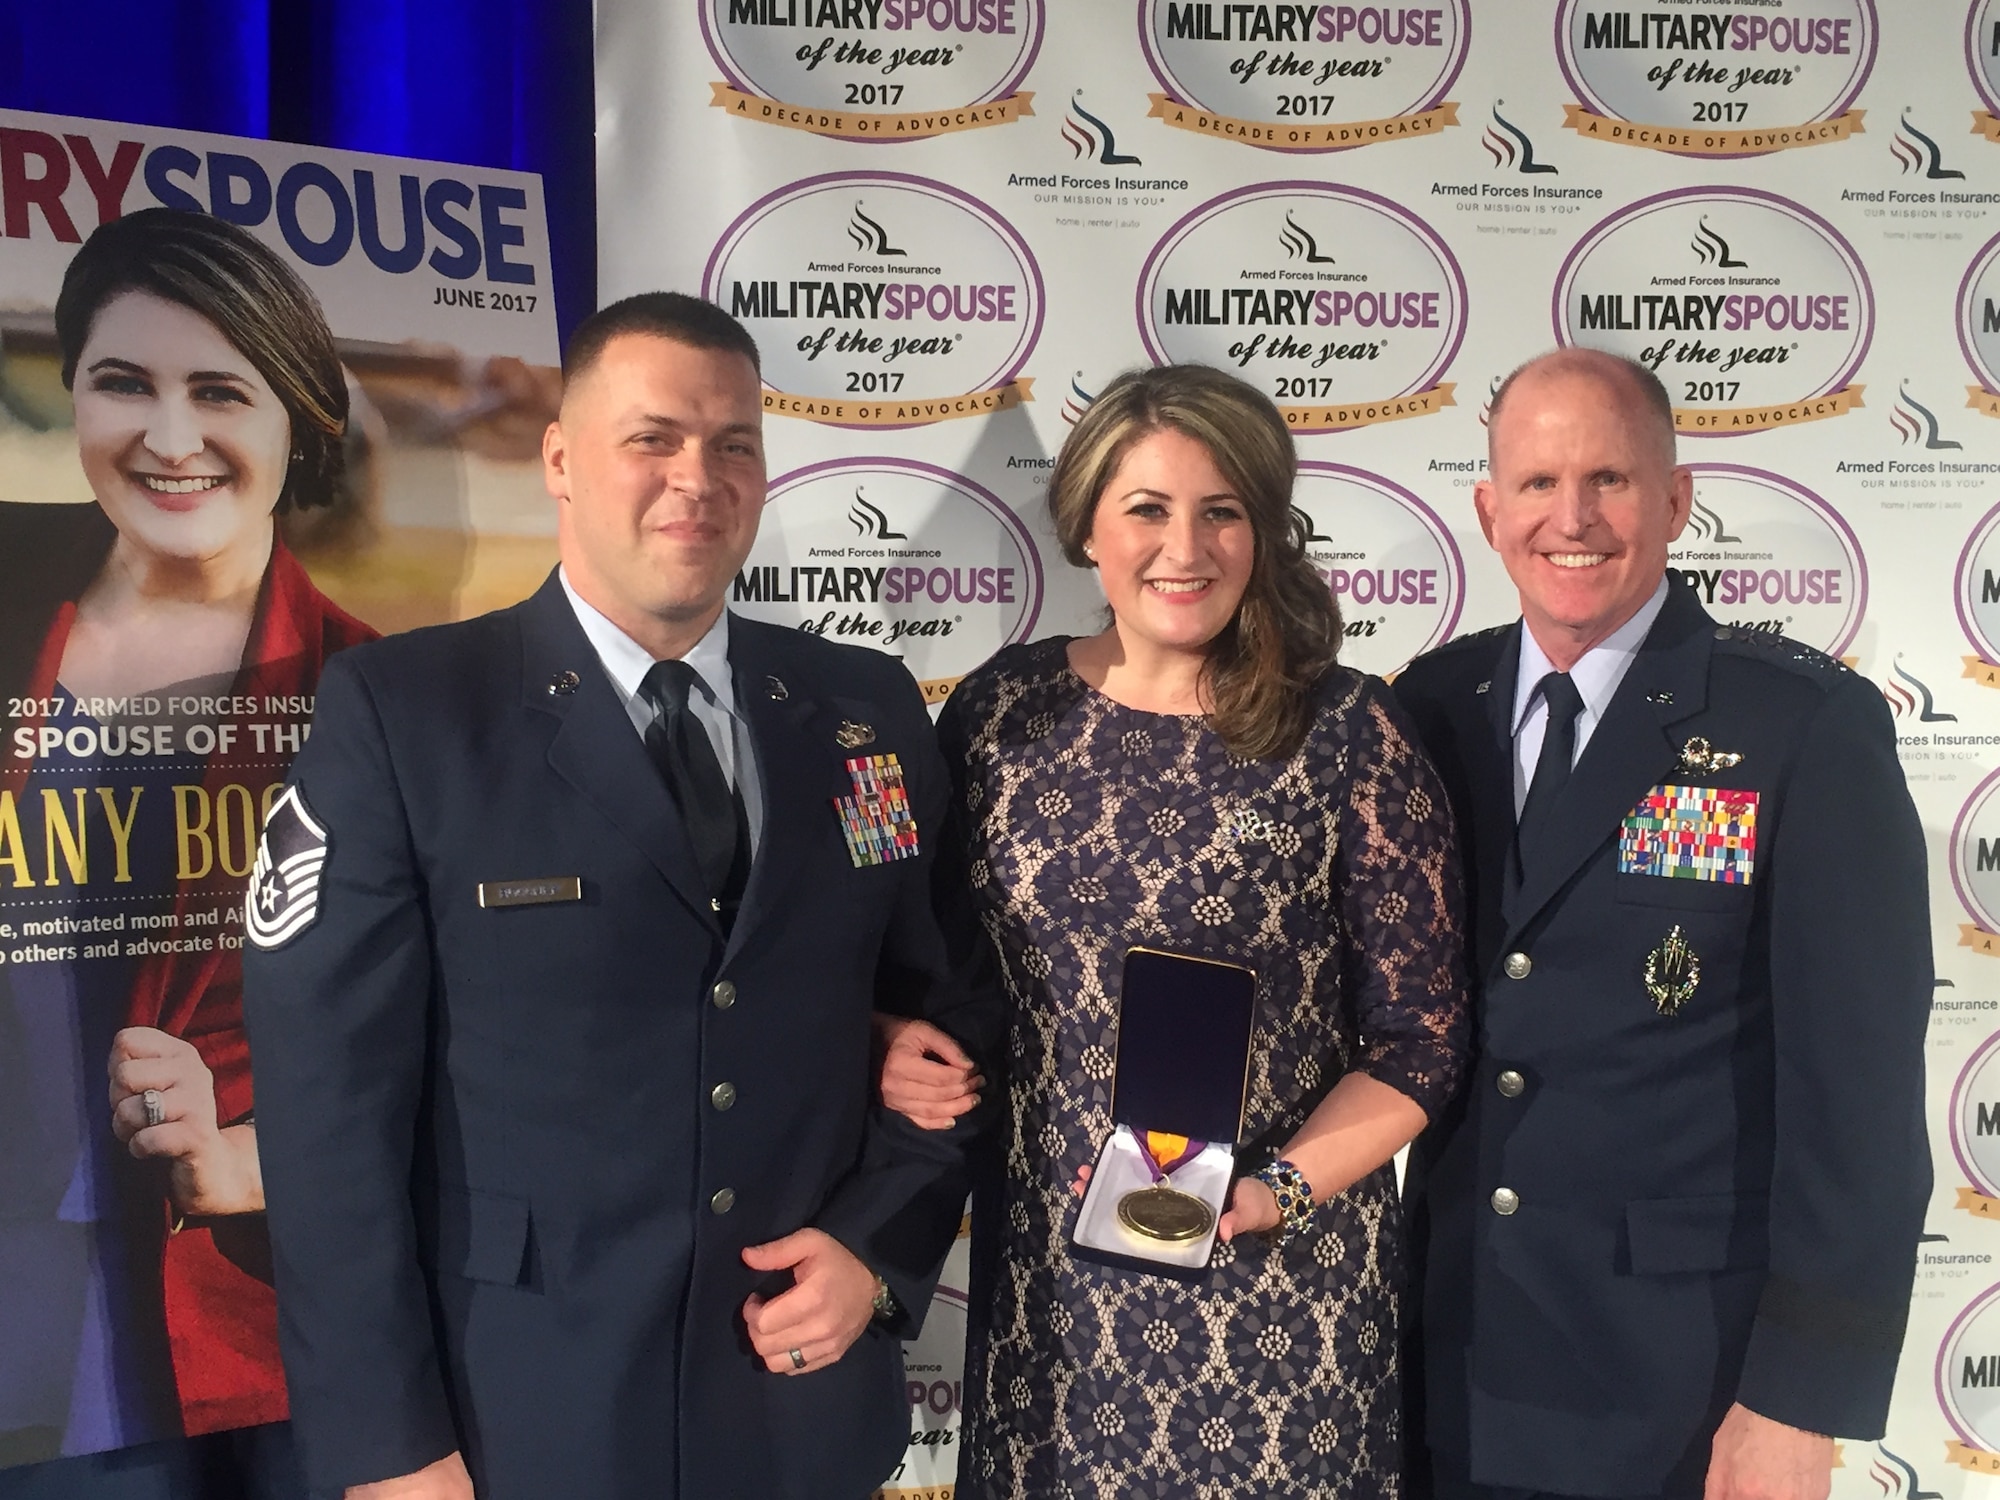 Mrs. Brittany Boccher is flanked by husband Master Sgt. (Special Agent) Adam Boccher of Air Force Office of Special investigations Detachment 327, Little Rock Air Force Base, Ark., and Gen. Stephen W. Wilson, Air Force Vice Chief of Staff, after she received the 2017 Armed Forces Insurance Military Spouse of the Year Award May 12, at the U.S, Chamber of Commerce in Washington, D.C. (Photo by Suzanne Trevino/Gordon C. James Public Relations)  